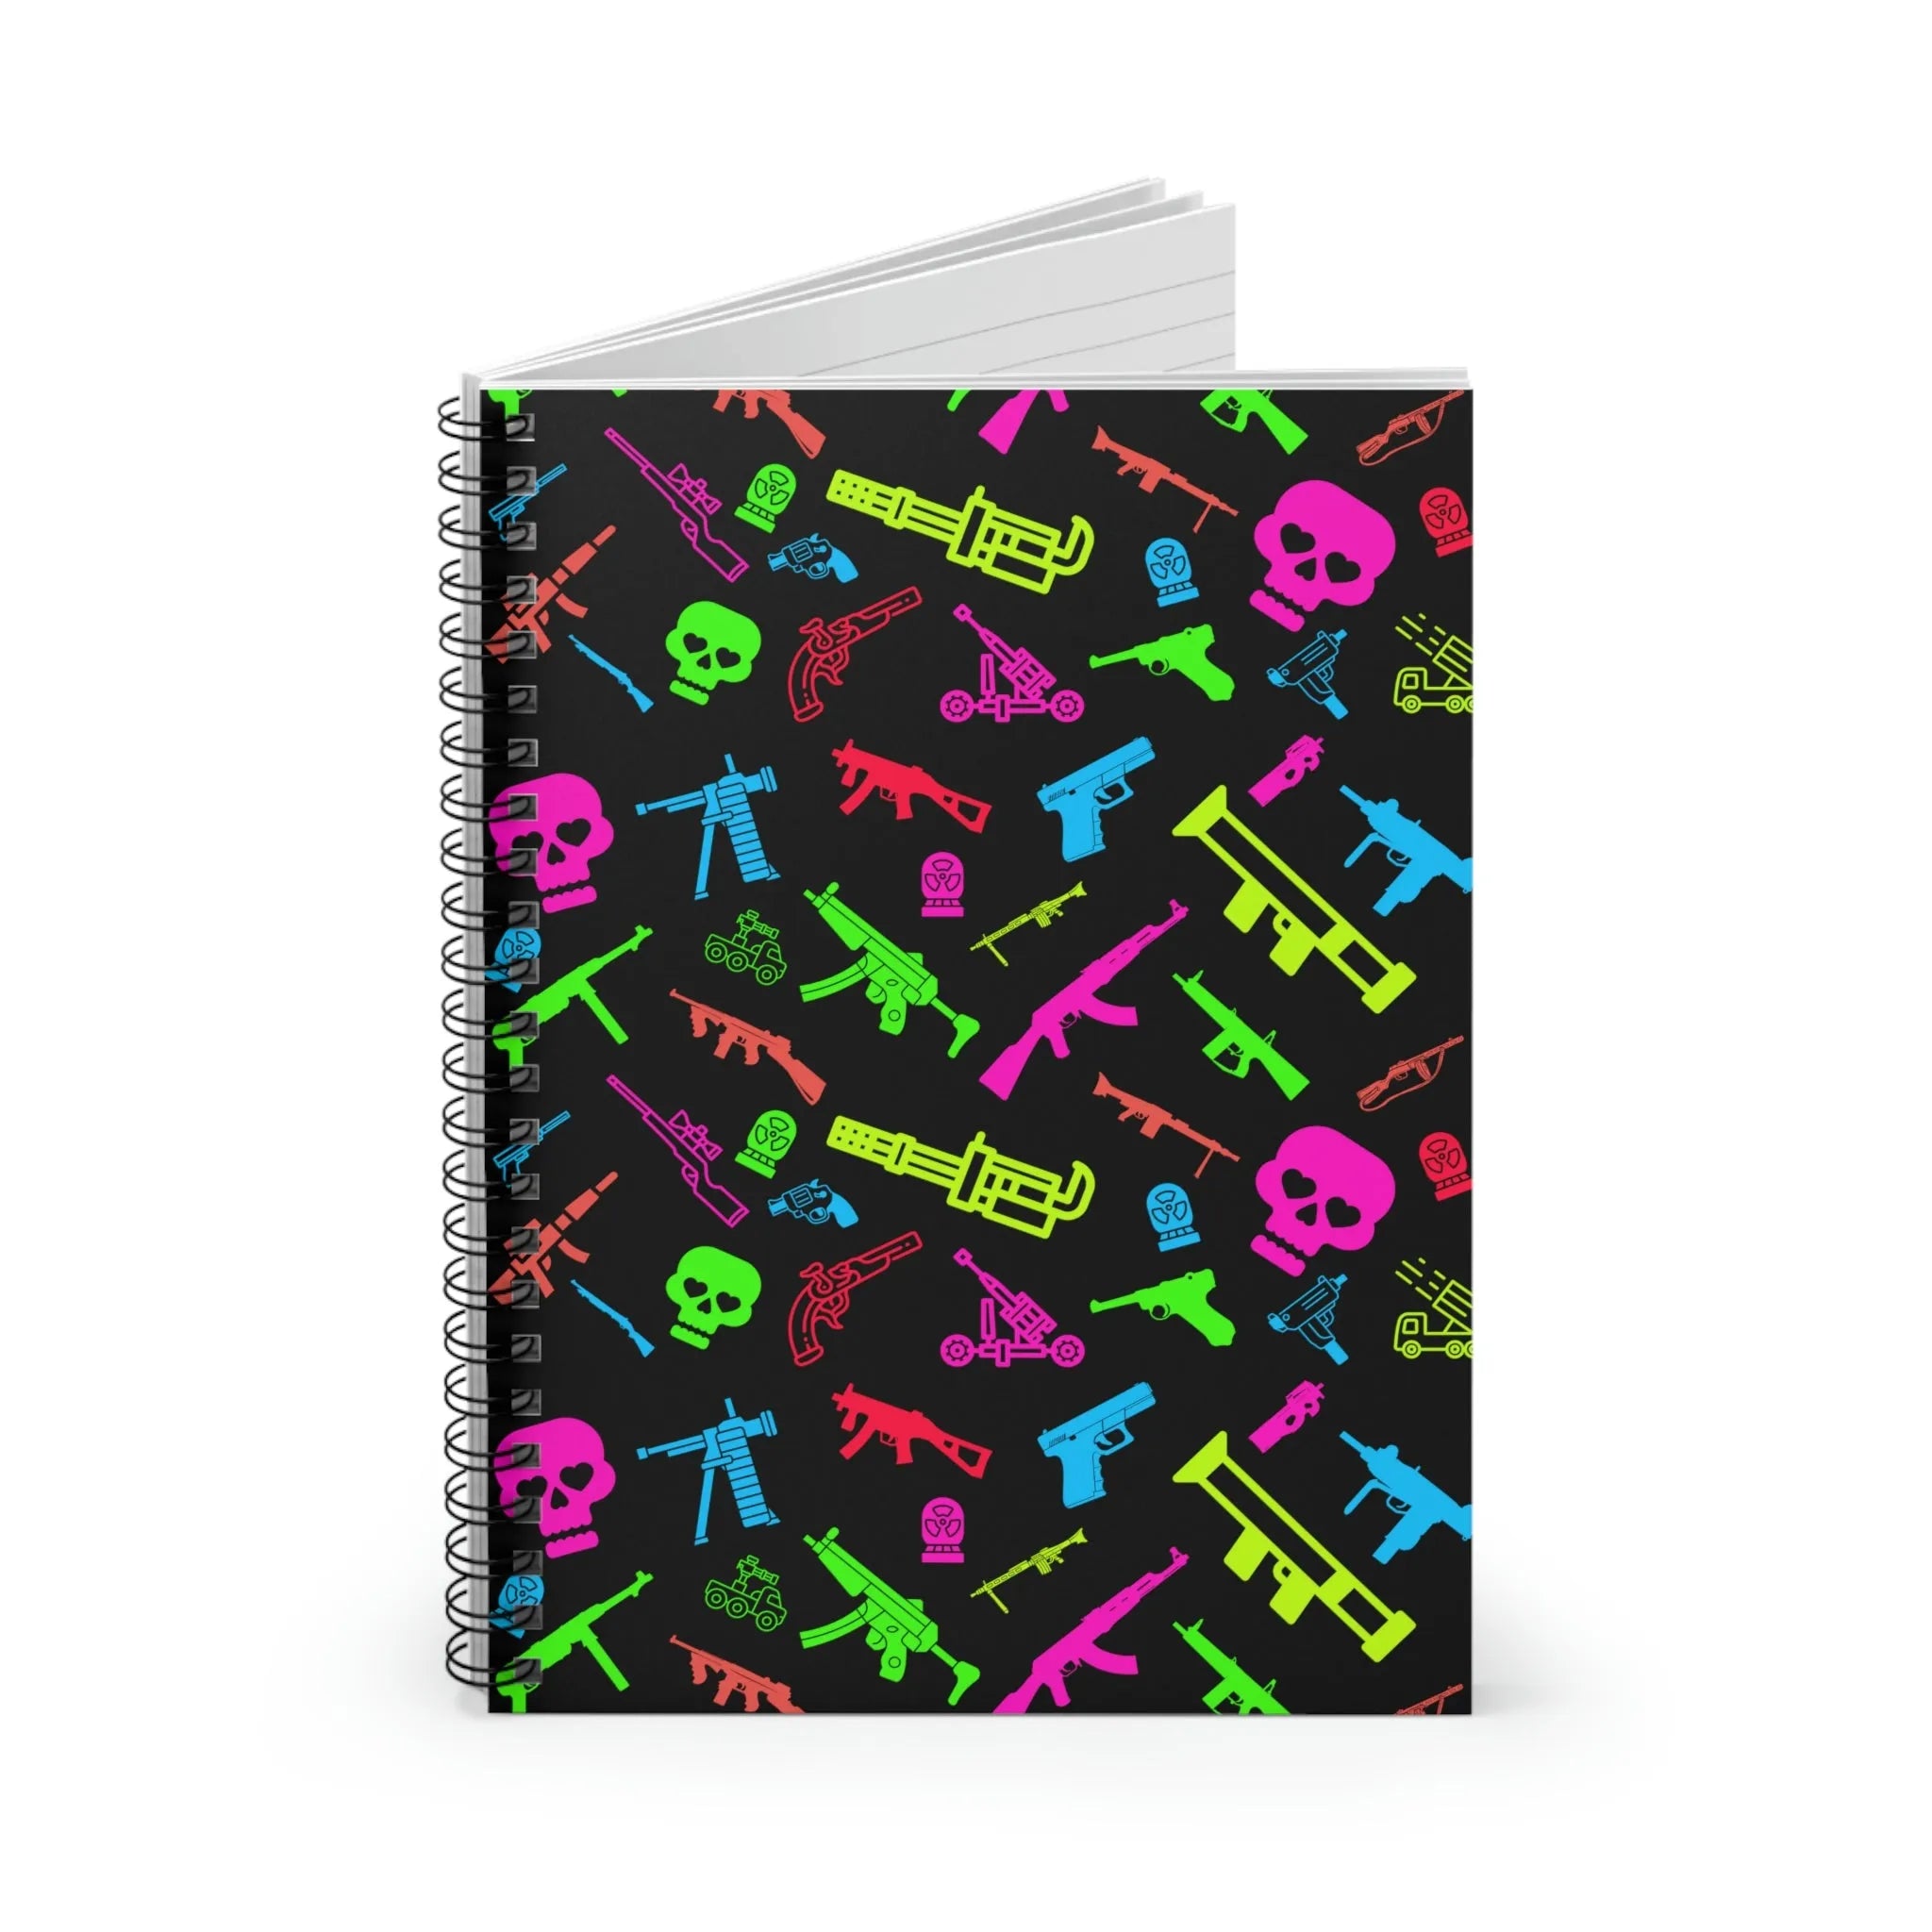 Retro Neon Firearms Spiral Notebook - Ruled Line